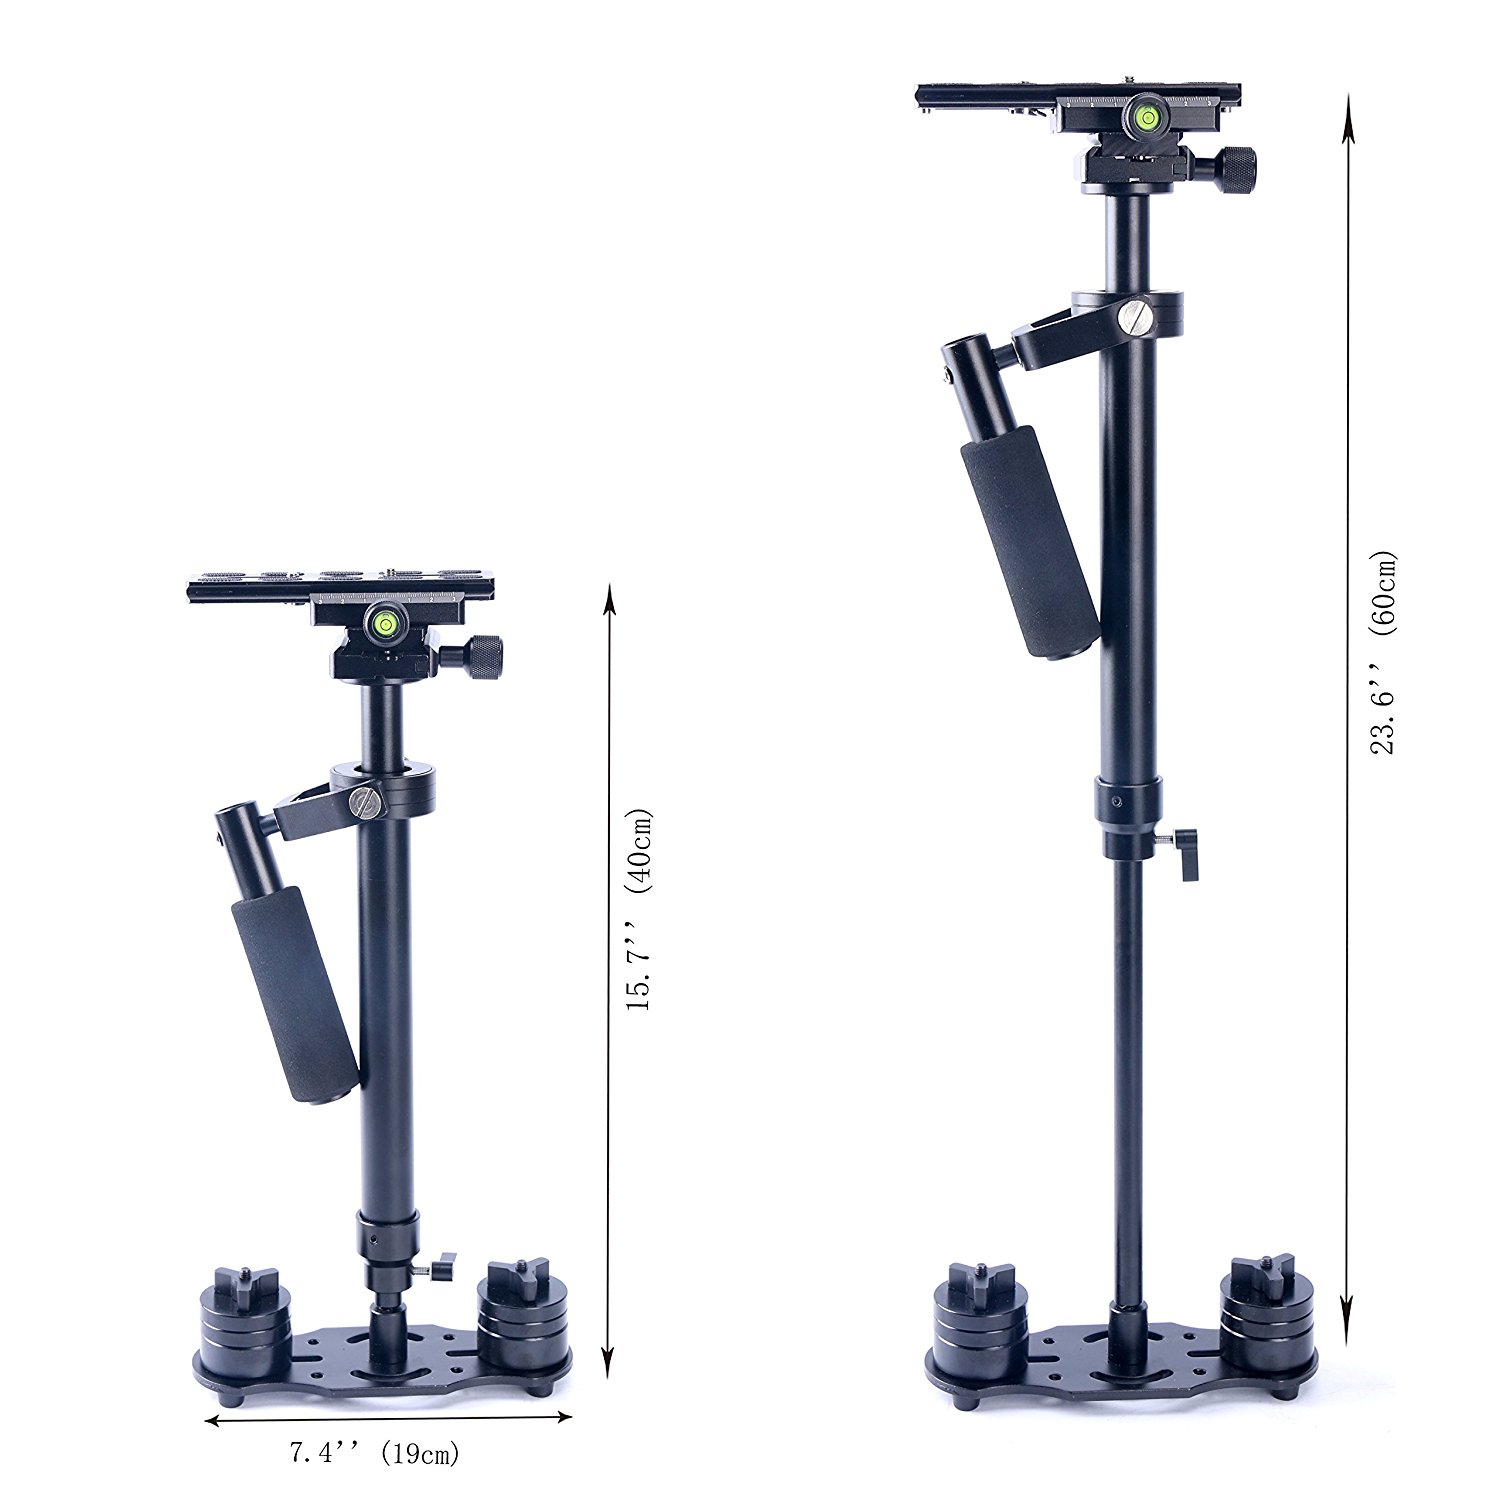 S60 Handheld Steadicam/Camera Stabilizer 24"/60cm with Quick Release Plate DSLR - 75797daa5978e47f5If8c7agggbg8dd7c6qwnX - S60 Handheld Steadicam/Camera Stabilizer 24&#8243;/60cm with Quick Release Plate DSLR